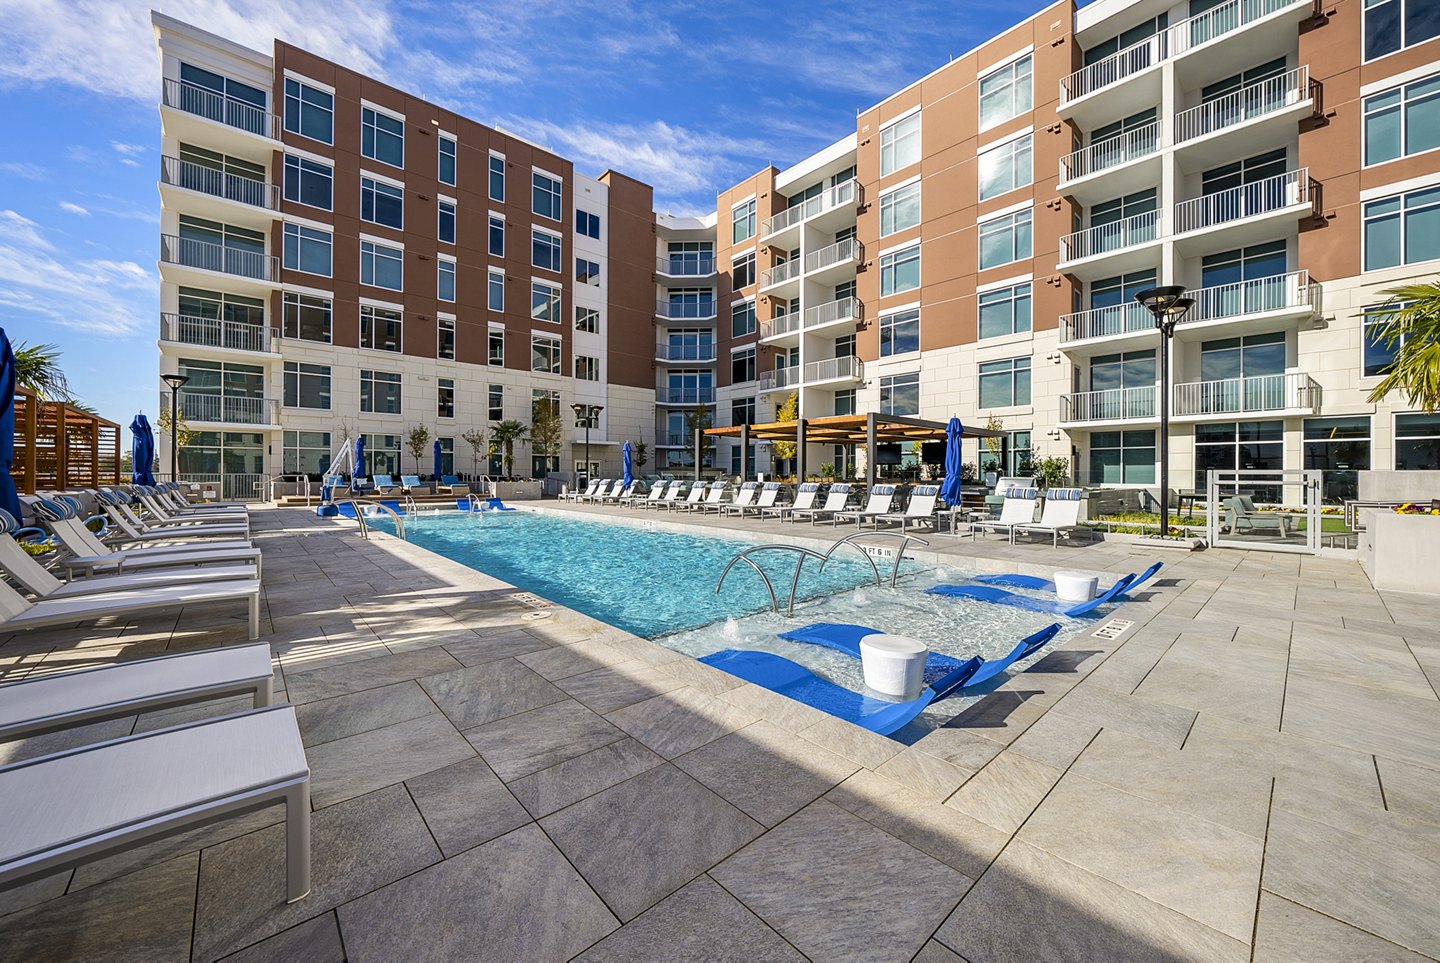 Element Southpark - Apartments in Charlotte, NC